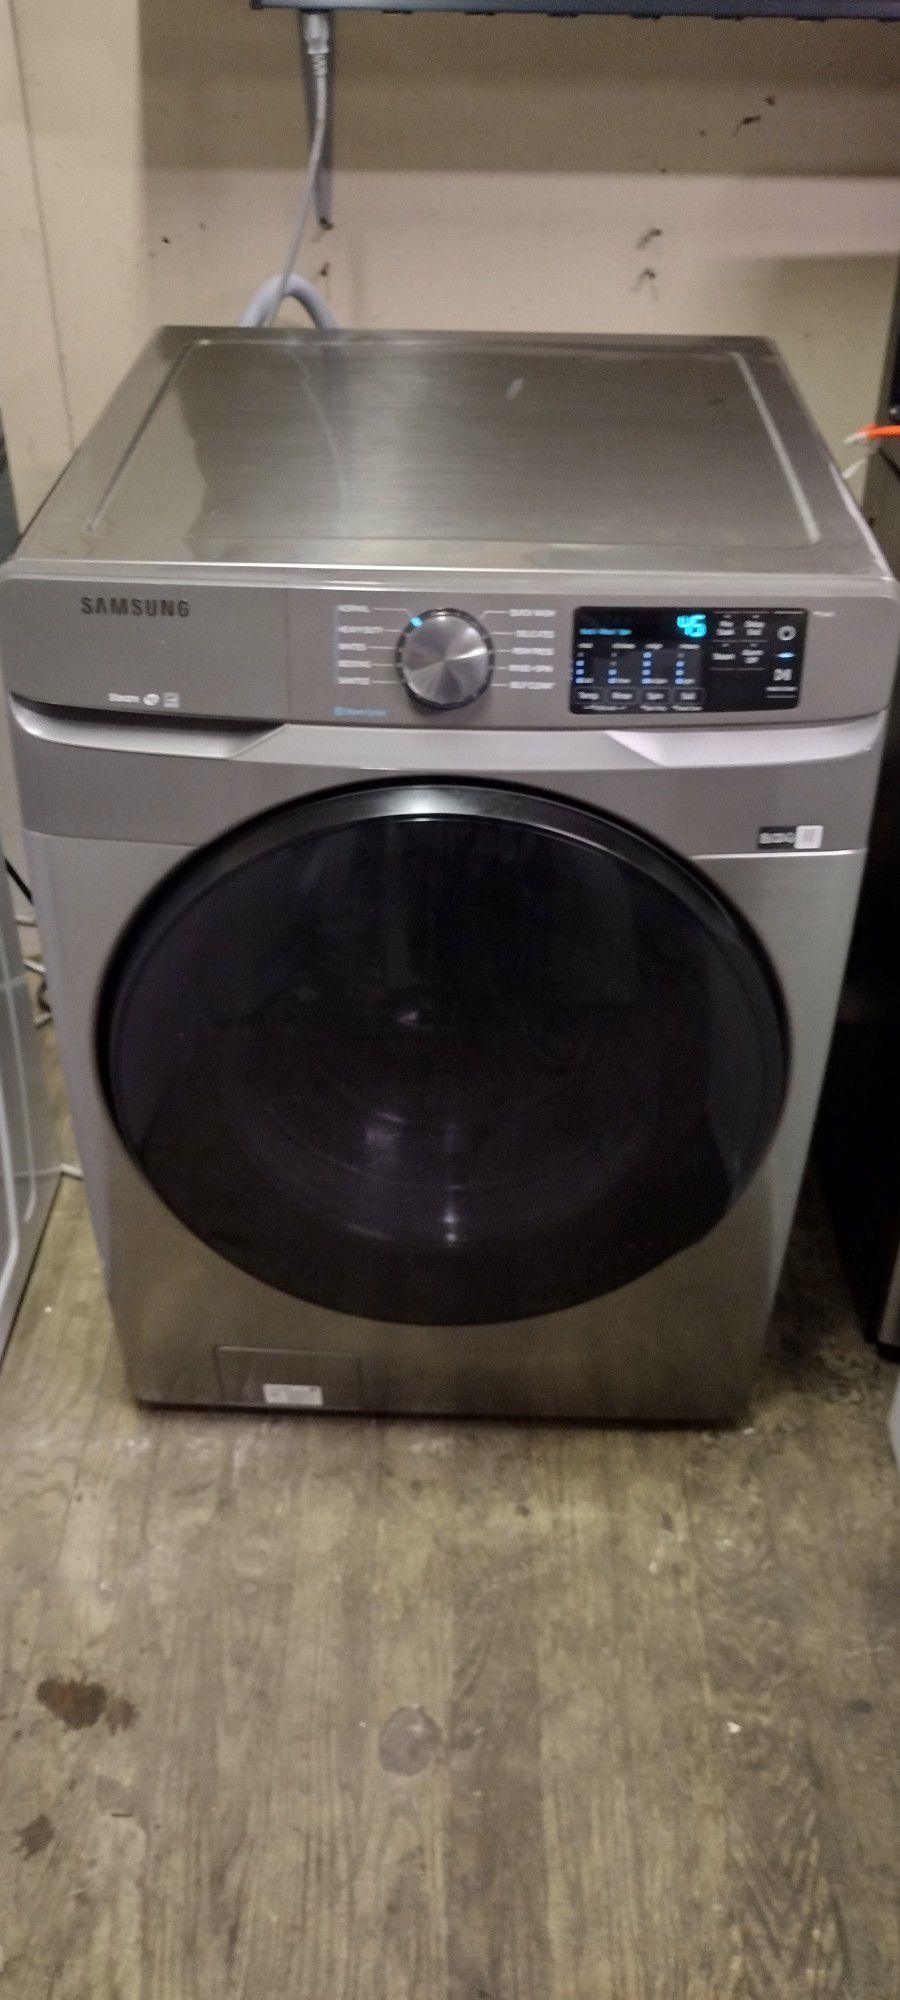 Samsung Platinum Stainless FrontLoad Washer - Brand New Scratch & Dent - HAVE 2 UNITS AVAILABLE 